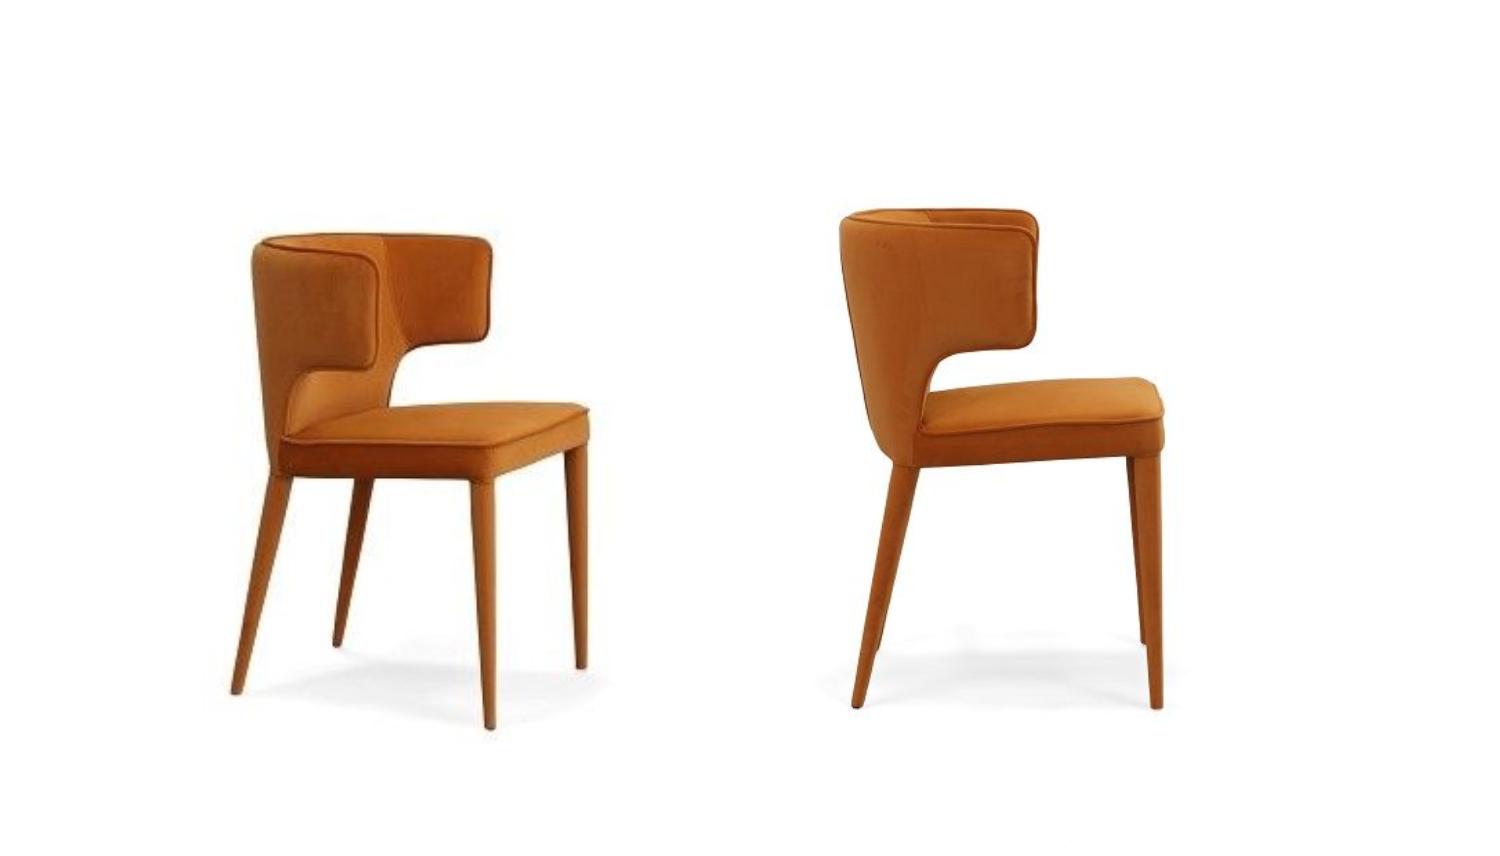 Contemporary, Modern Dining Chair Set Lucero VGYFDC1021F-ORG-DC-2pcs in White, Orange Fabric